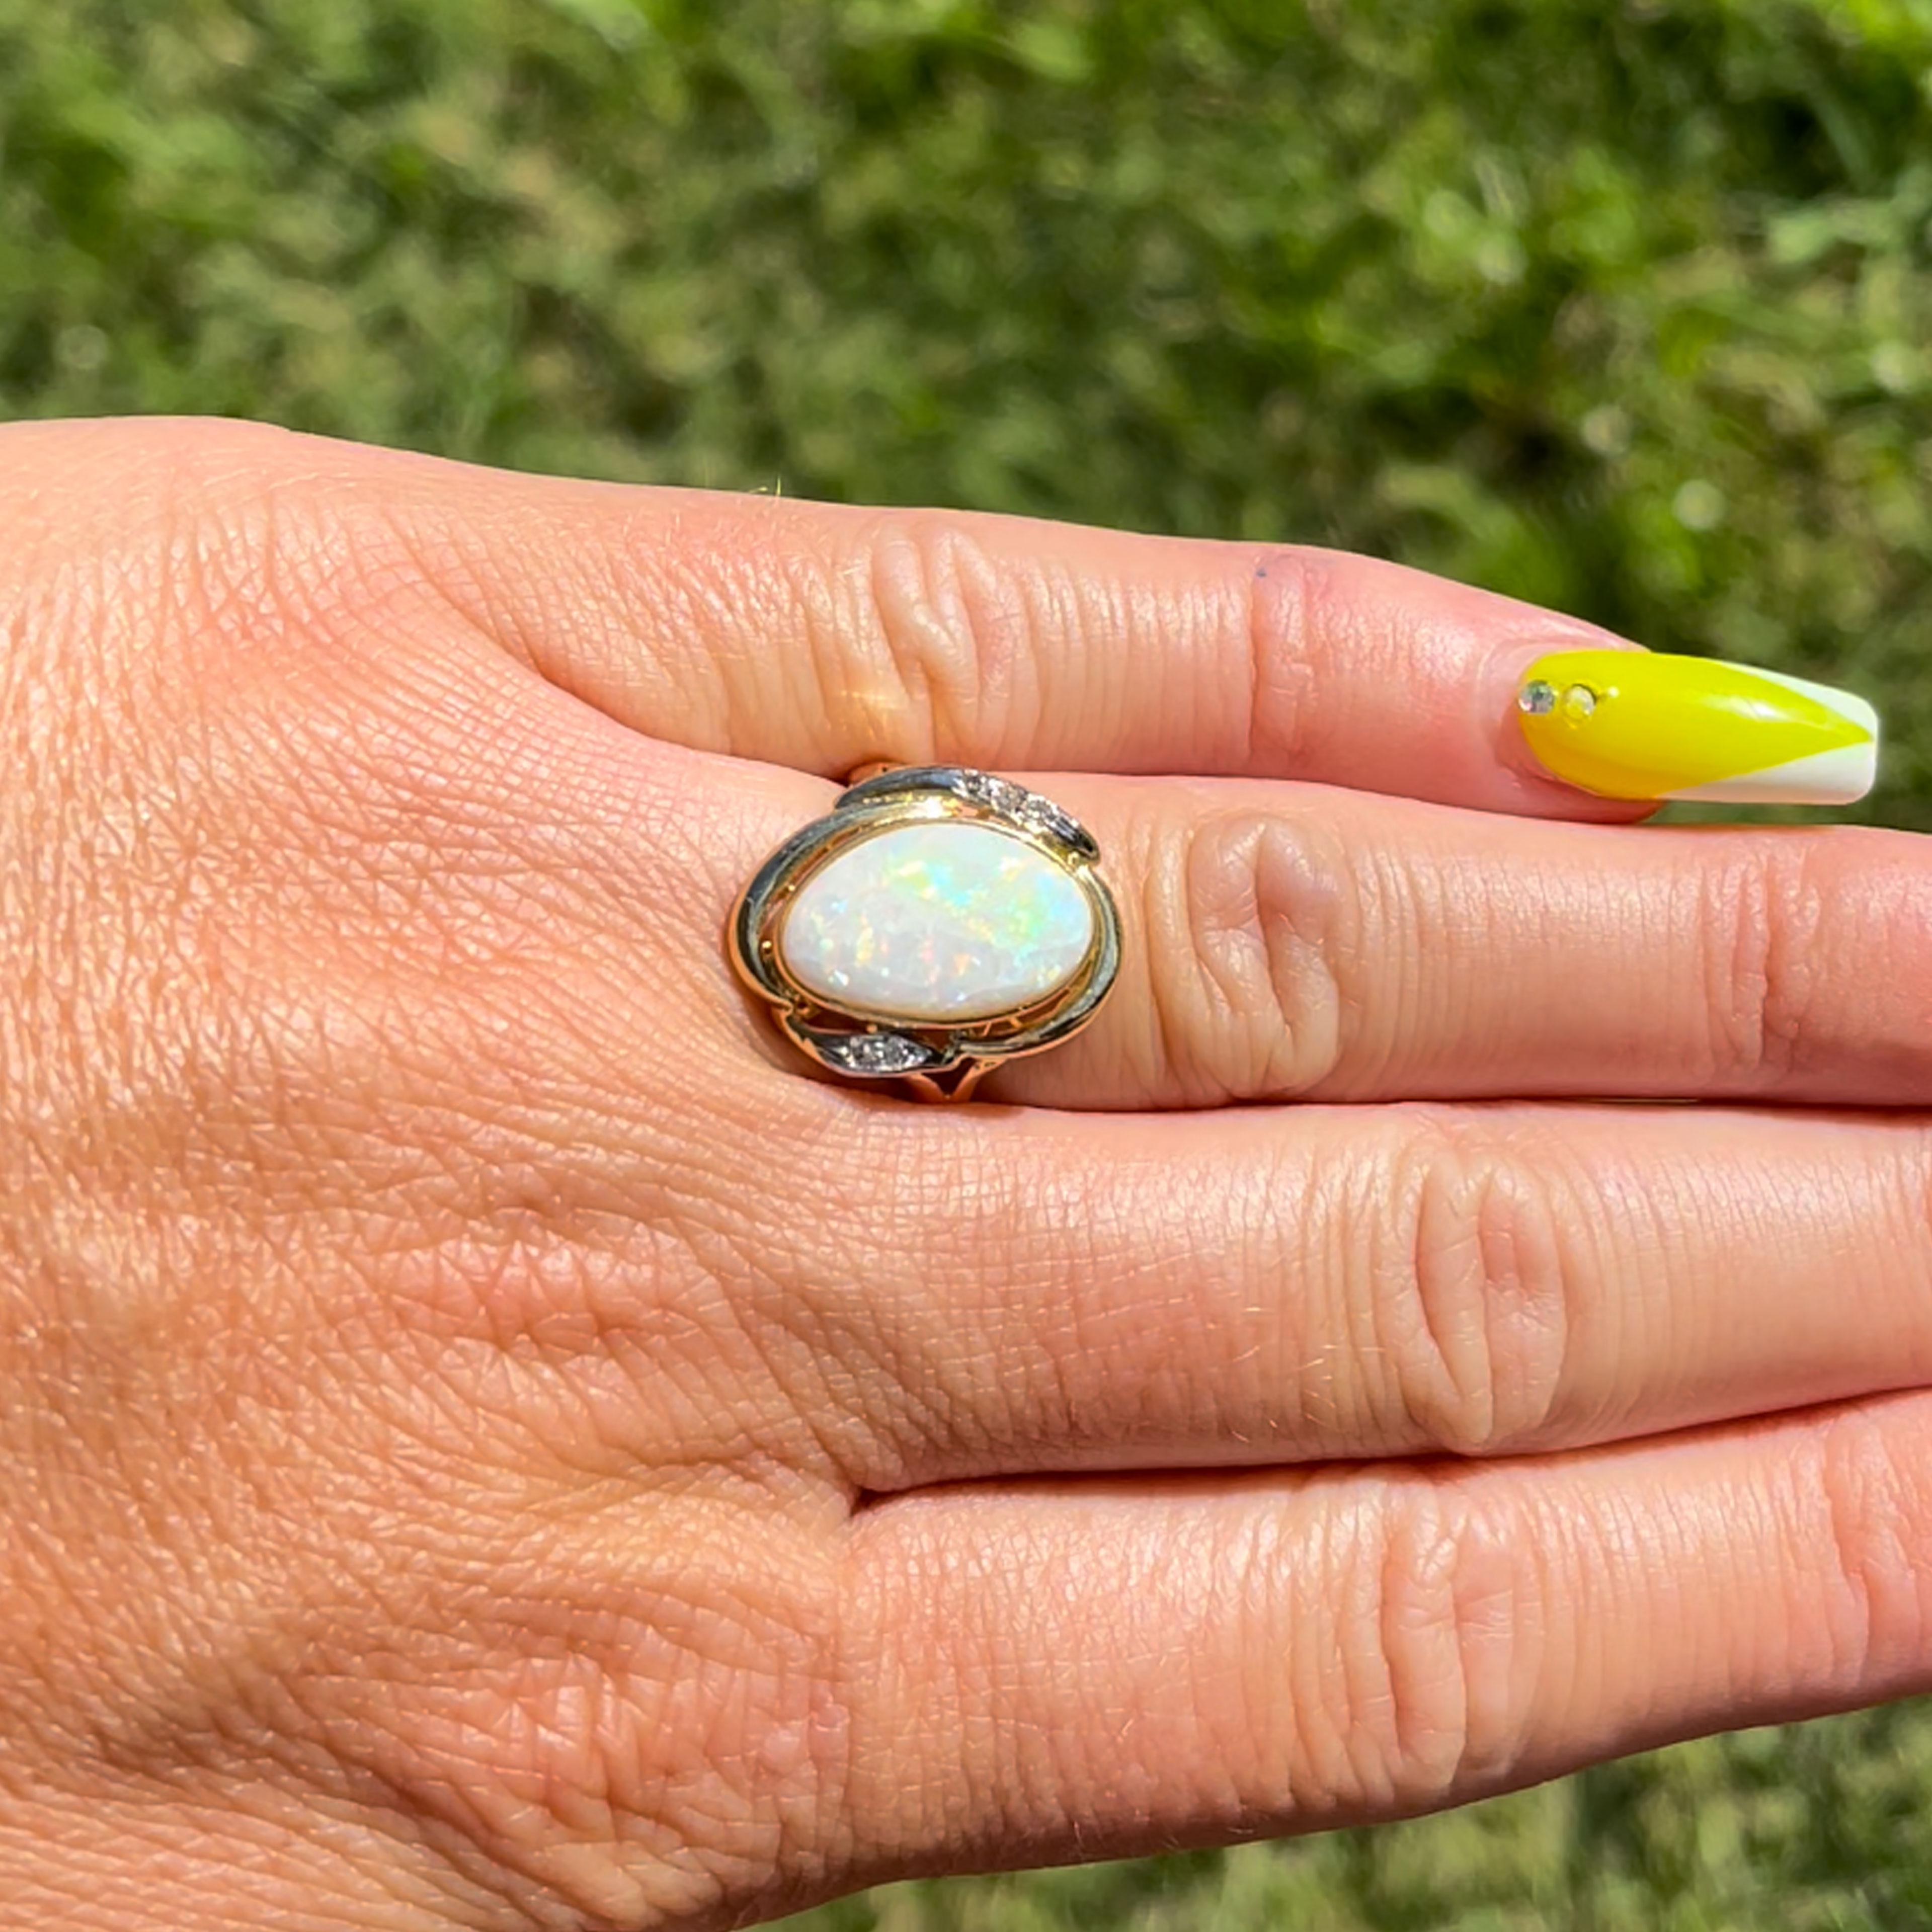 White Opal and Diamond split shank ring  in 14k Yellow Gold. The oval free form opal is bezel set and measures approximately 15.3mm x 9.5mm x 2.2mm. The white Ethiopian opal has a beautiful color play with green, blue and orange color flashes and